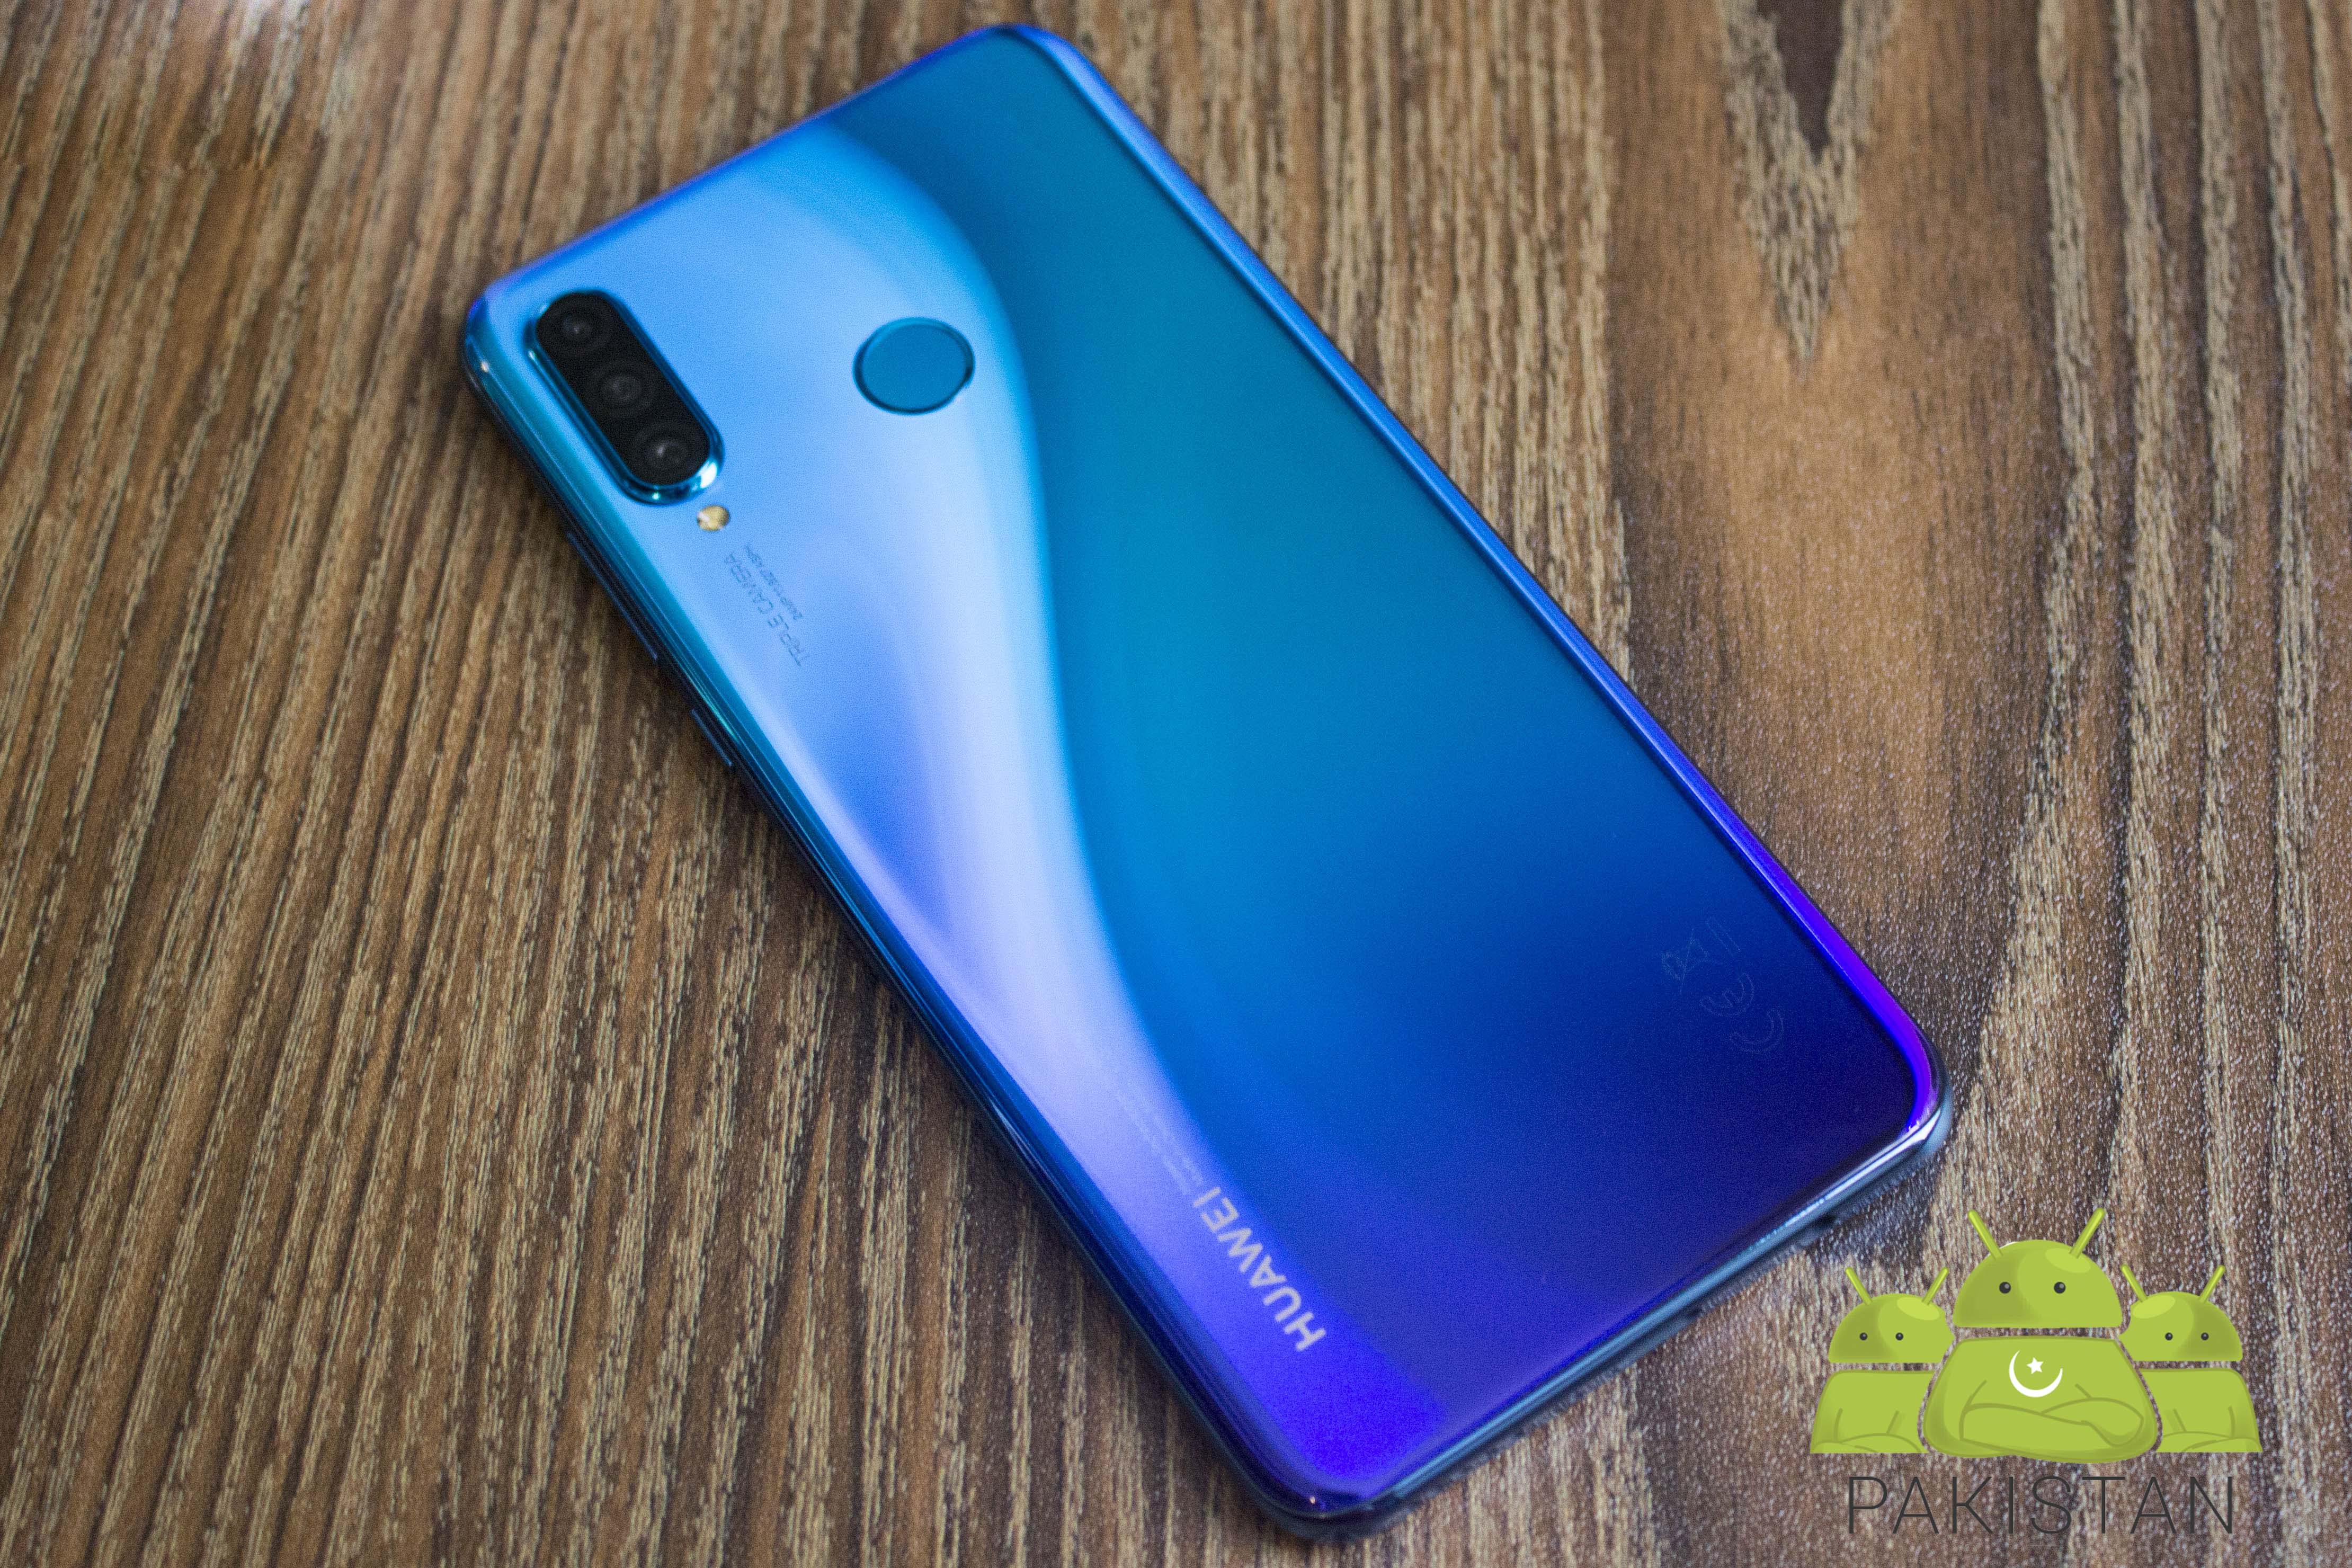 Huawei P30 Lite Comes with 32MP Front Facing Camera, Triple Rear